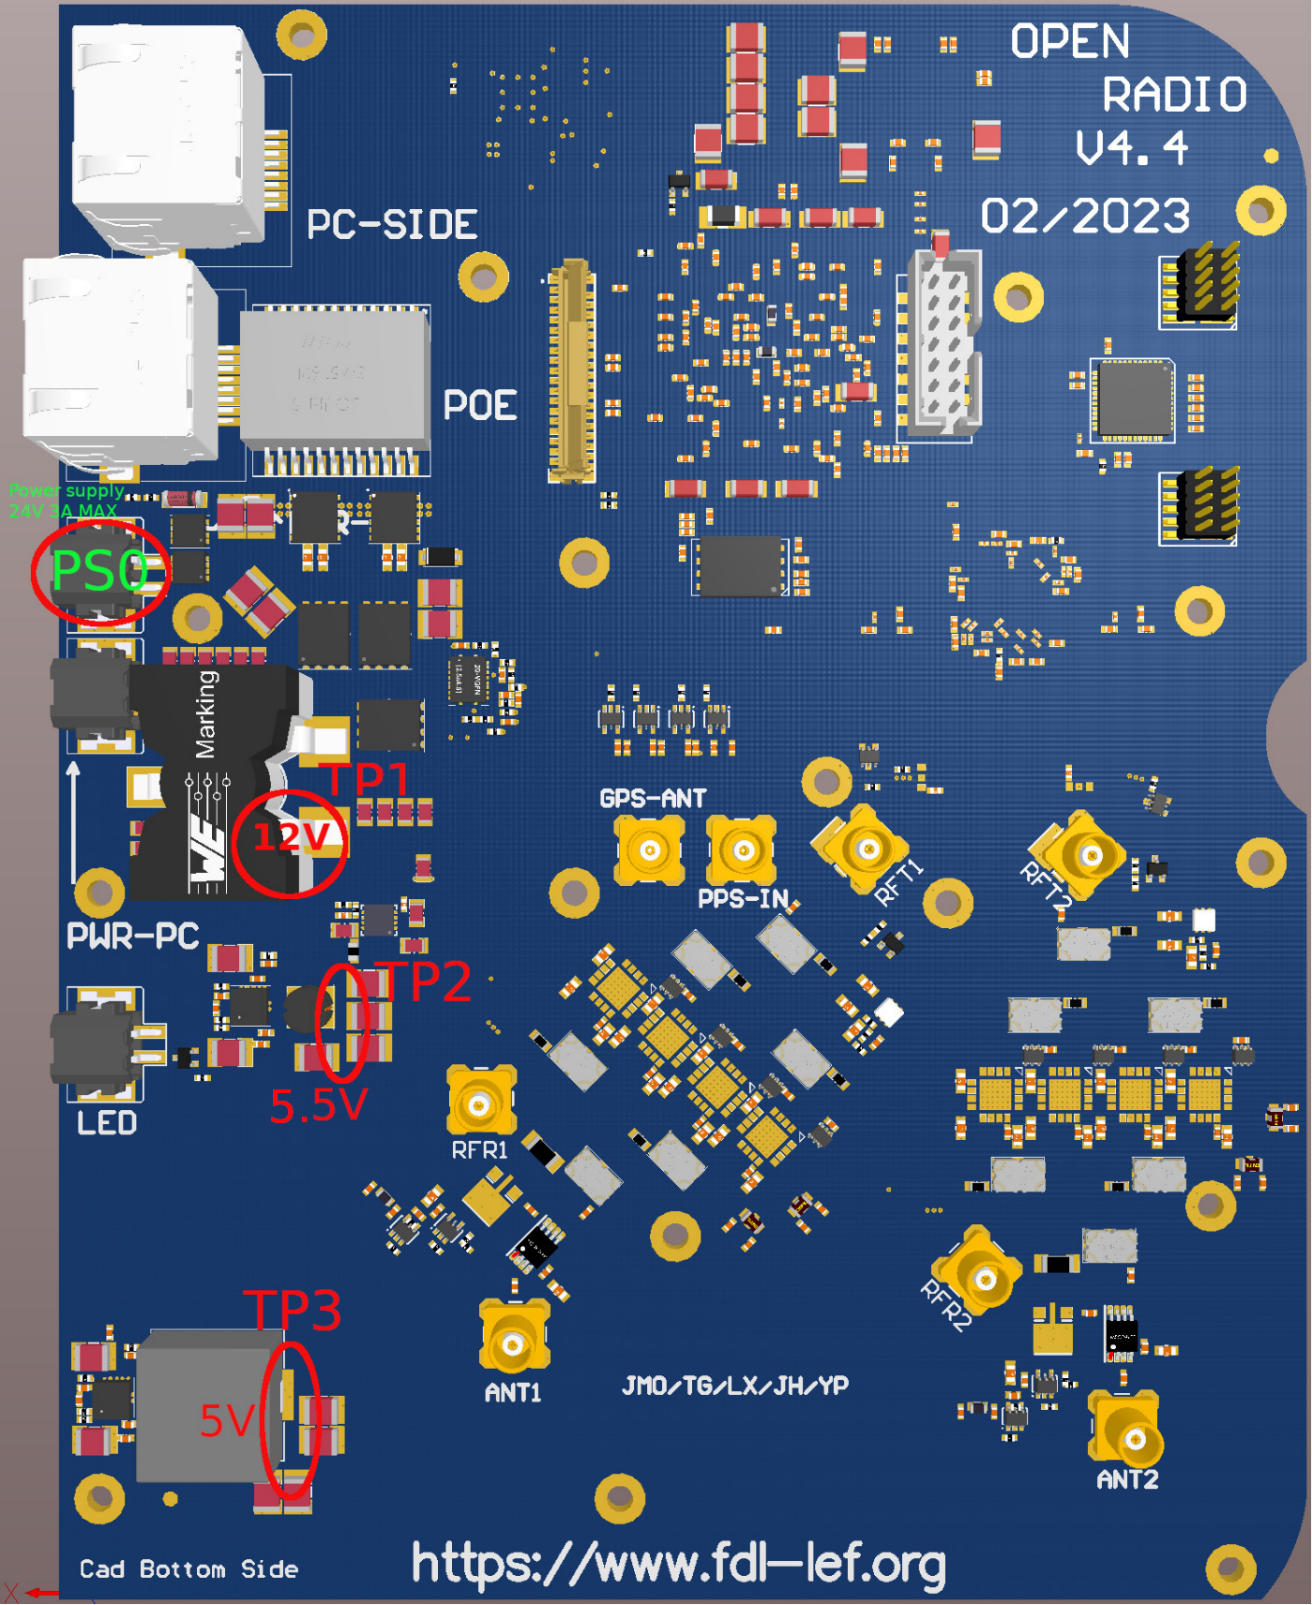 3D view of PCB board